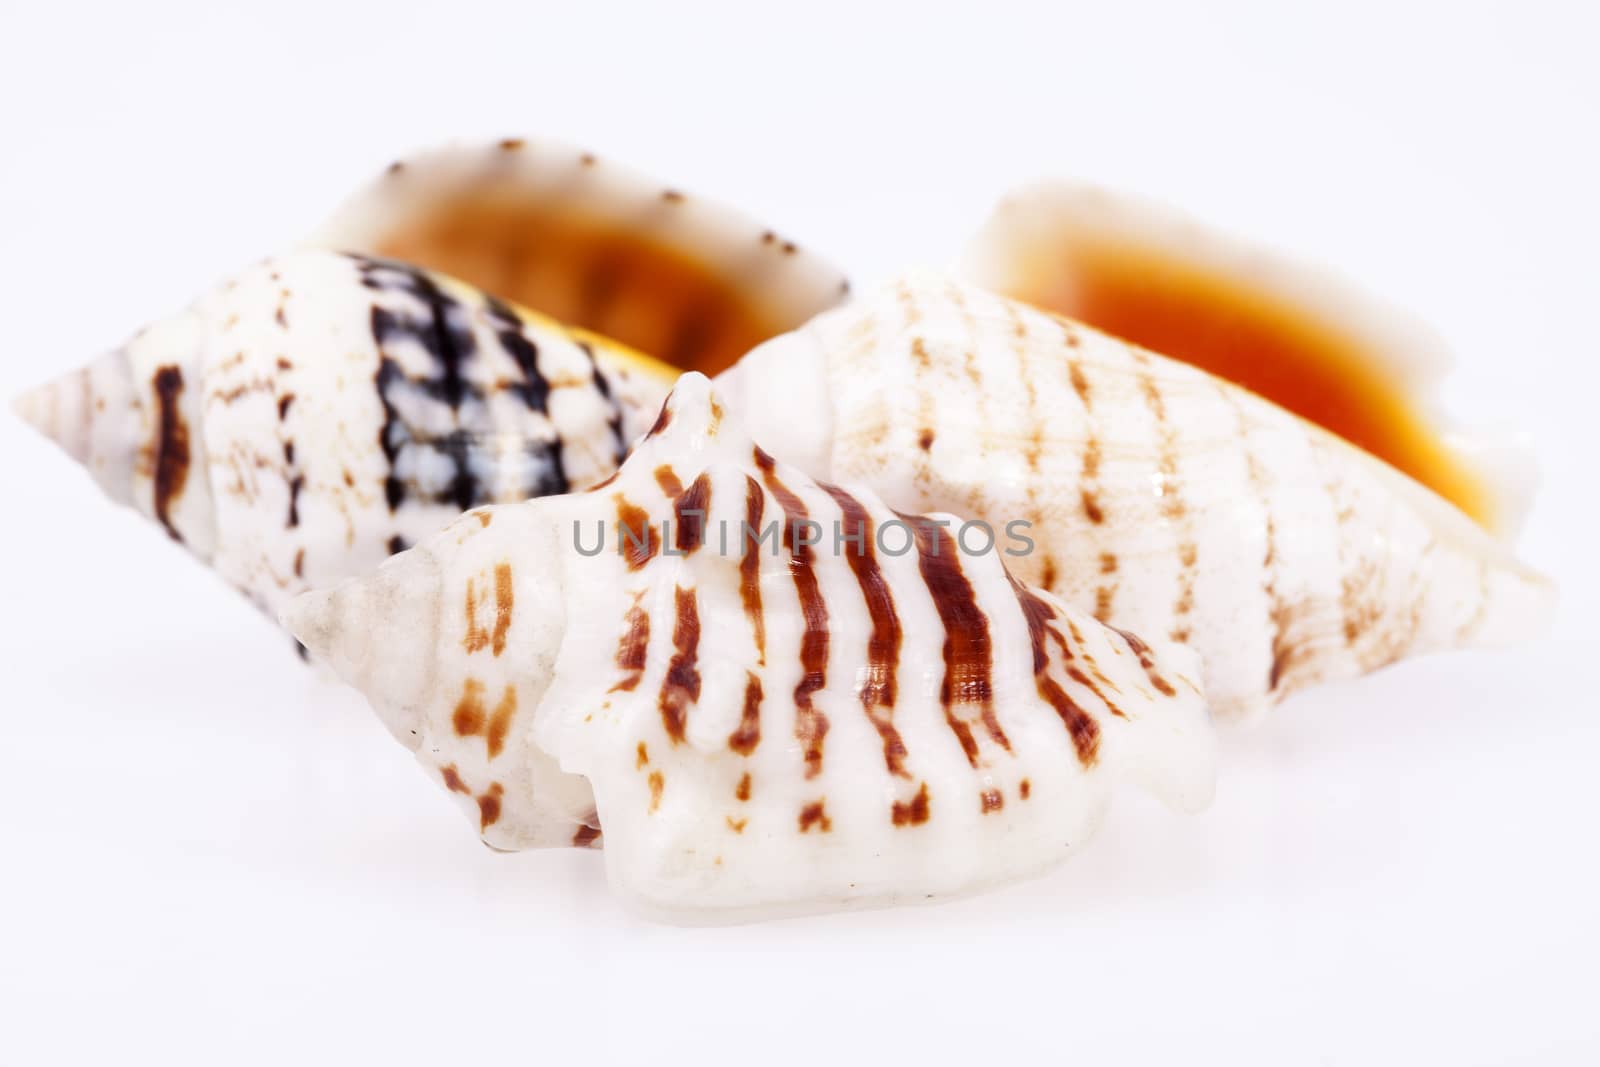 some sea shells isilated on white background, close up